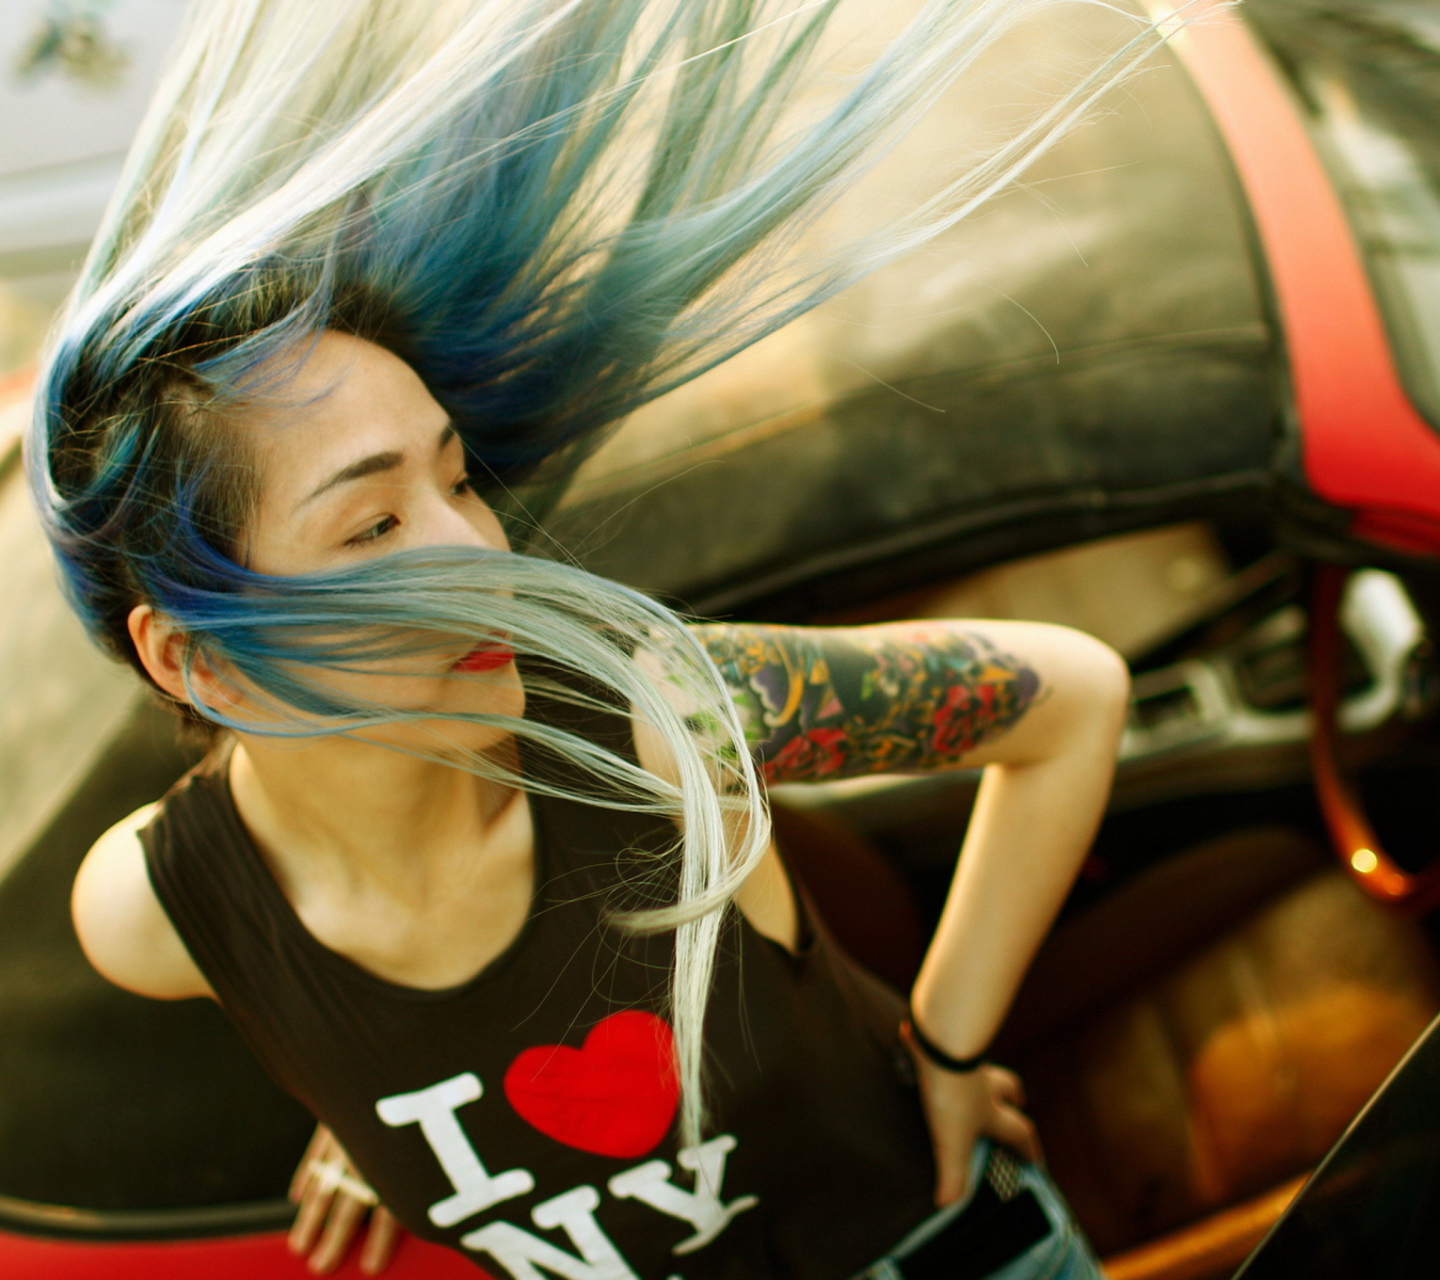 Das Cool Asian Girl With Blue Hair & I Love NY T-shirt Wallpaper 1440x1280